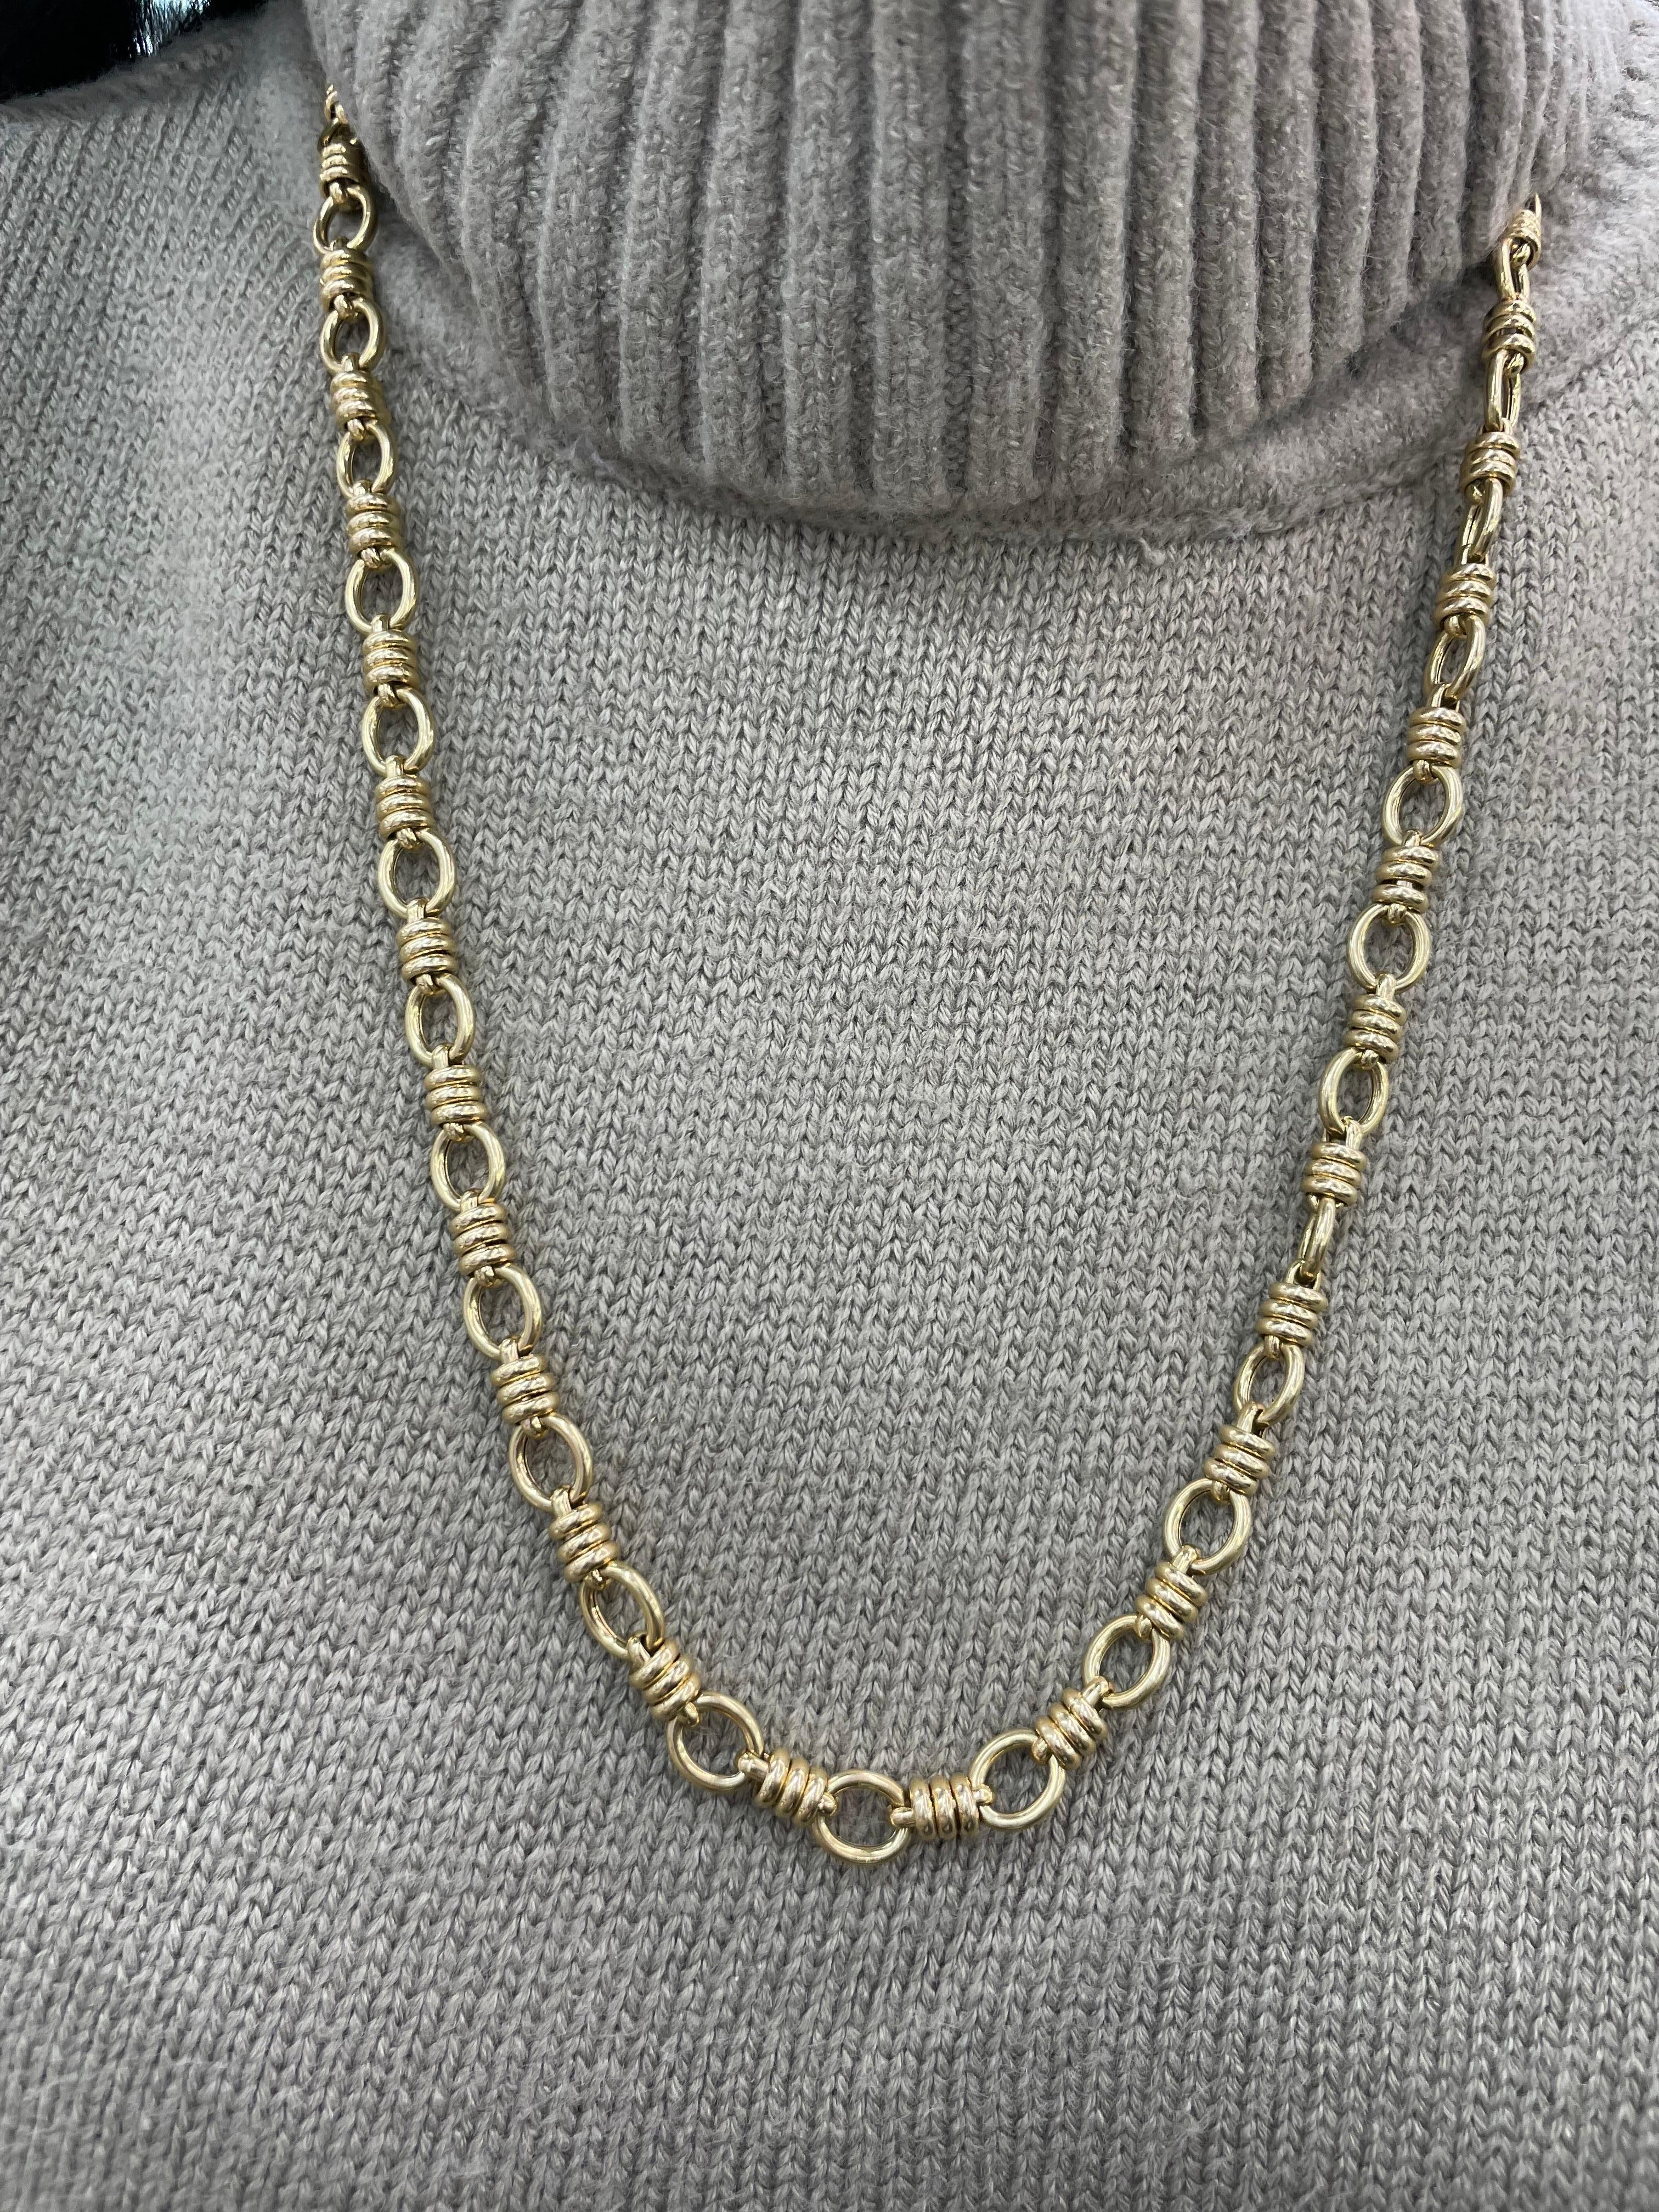 14 Karat yellow gold link necklace weighing 42.5 grams in 30.5 inches.
Great for Laying!